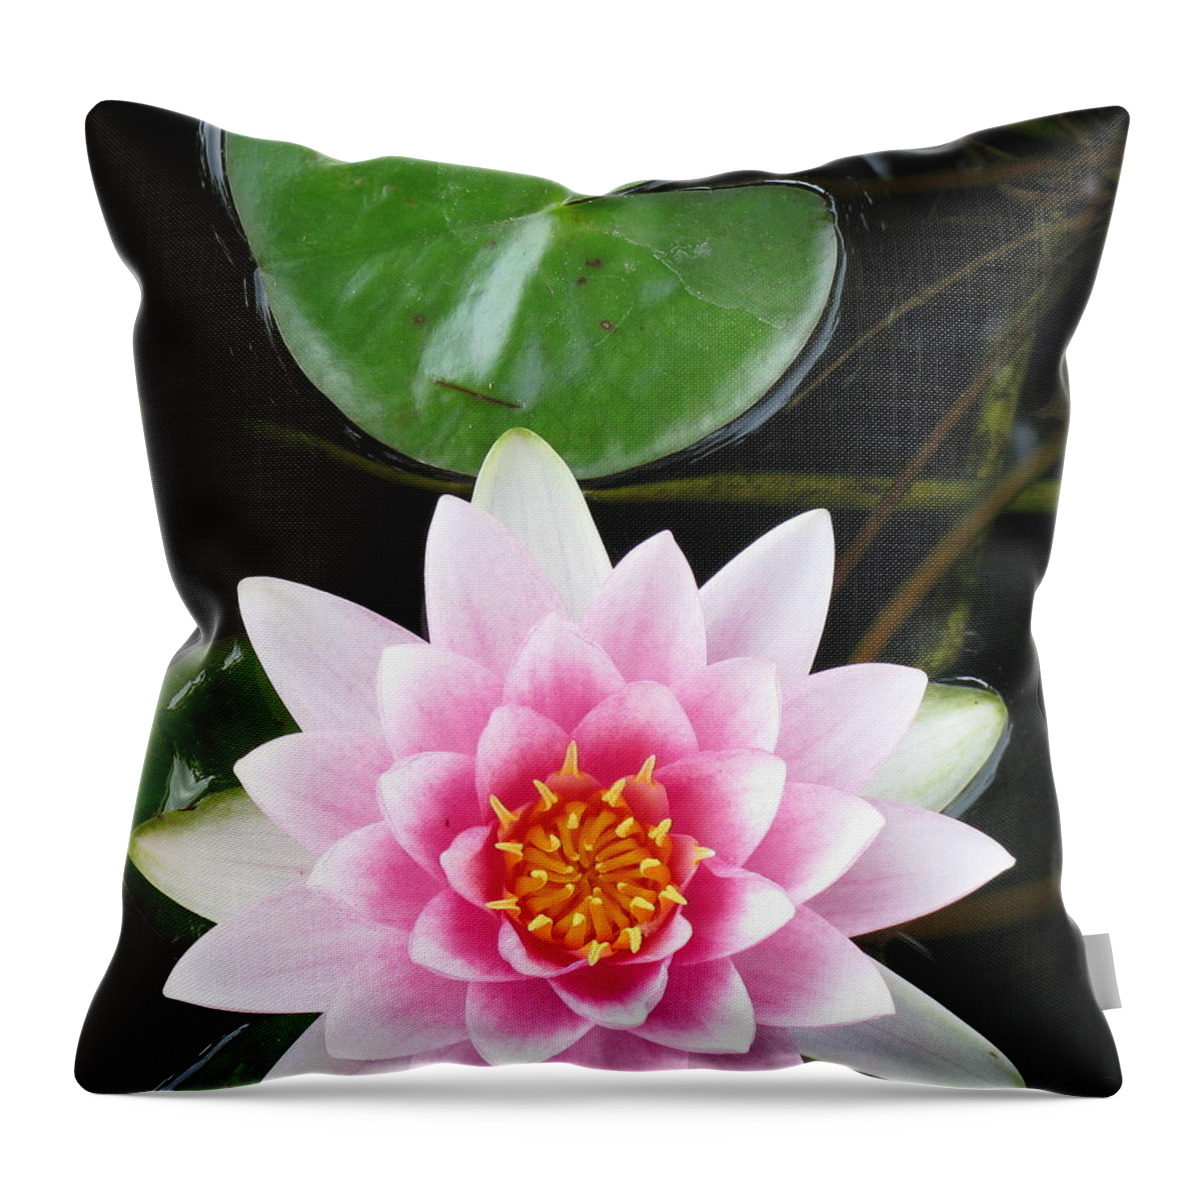 Asymmetrical Nature Throw Pillow featuring the photograph Vertical Water Lily by Debbie Finley